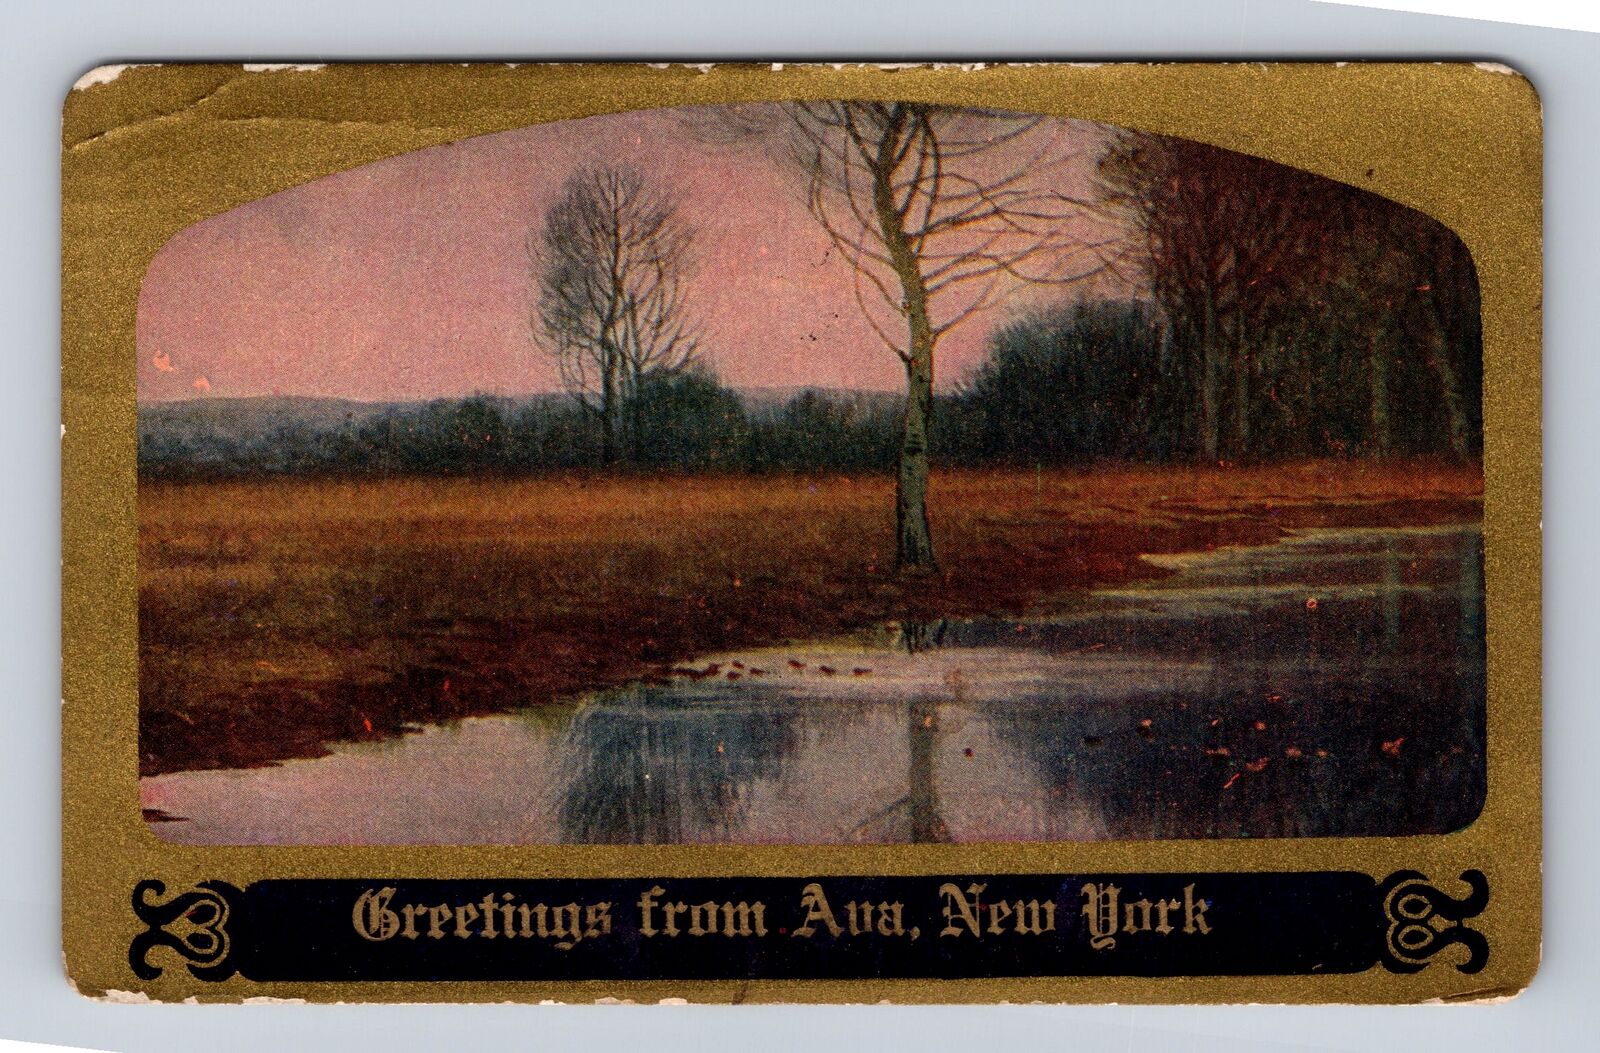 Ava NY-New York, General Greeting, Scenic Country View, Vintage c1915 Postcard